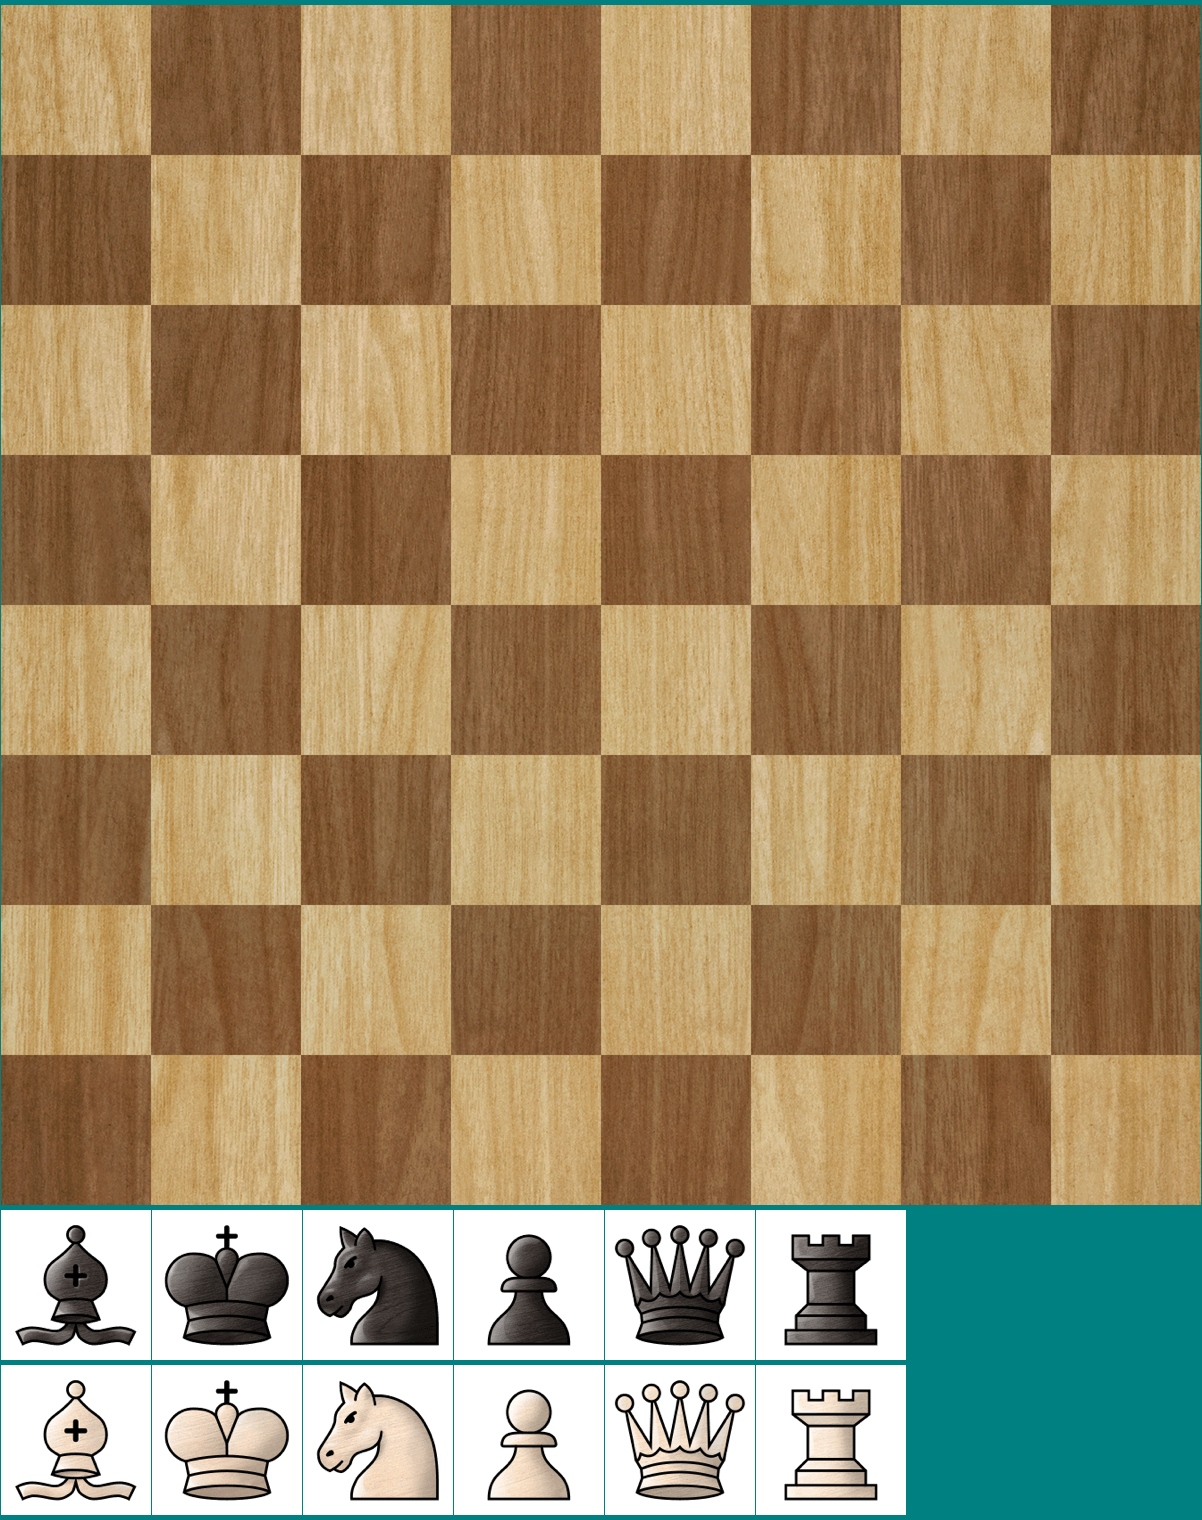 Chess - Board and Chess Pieces (Wood)